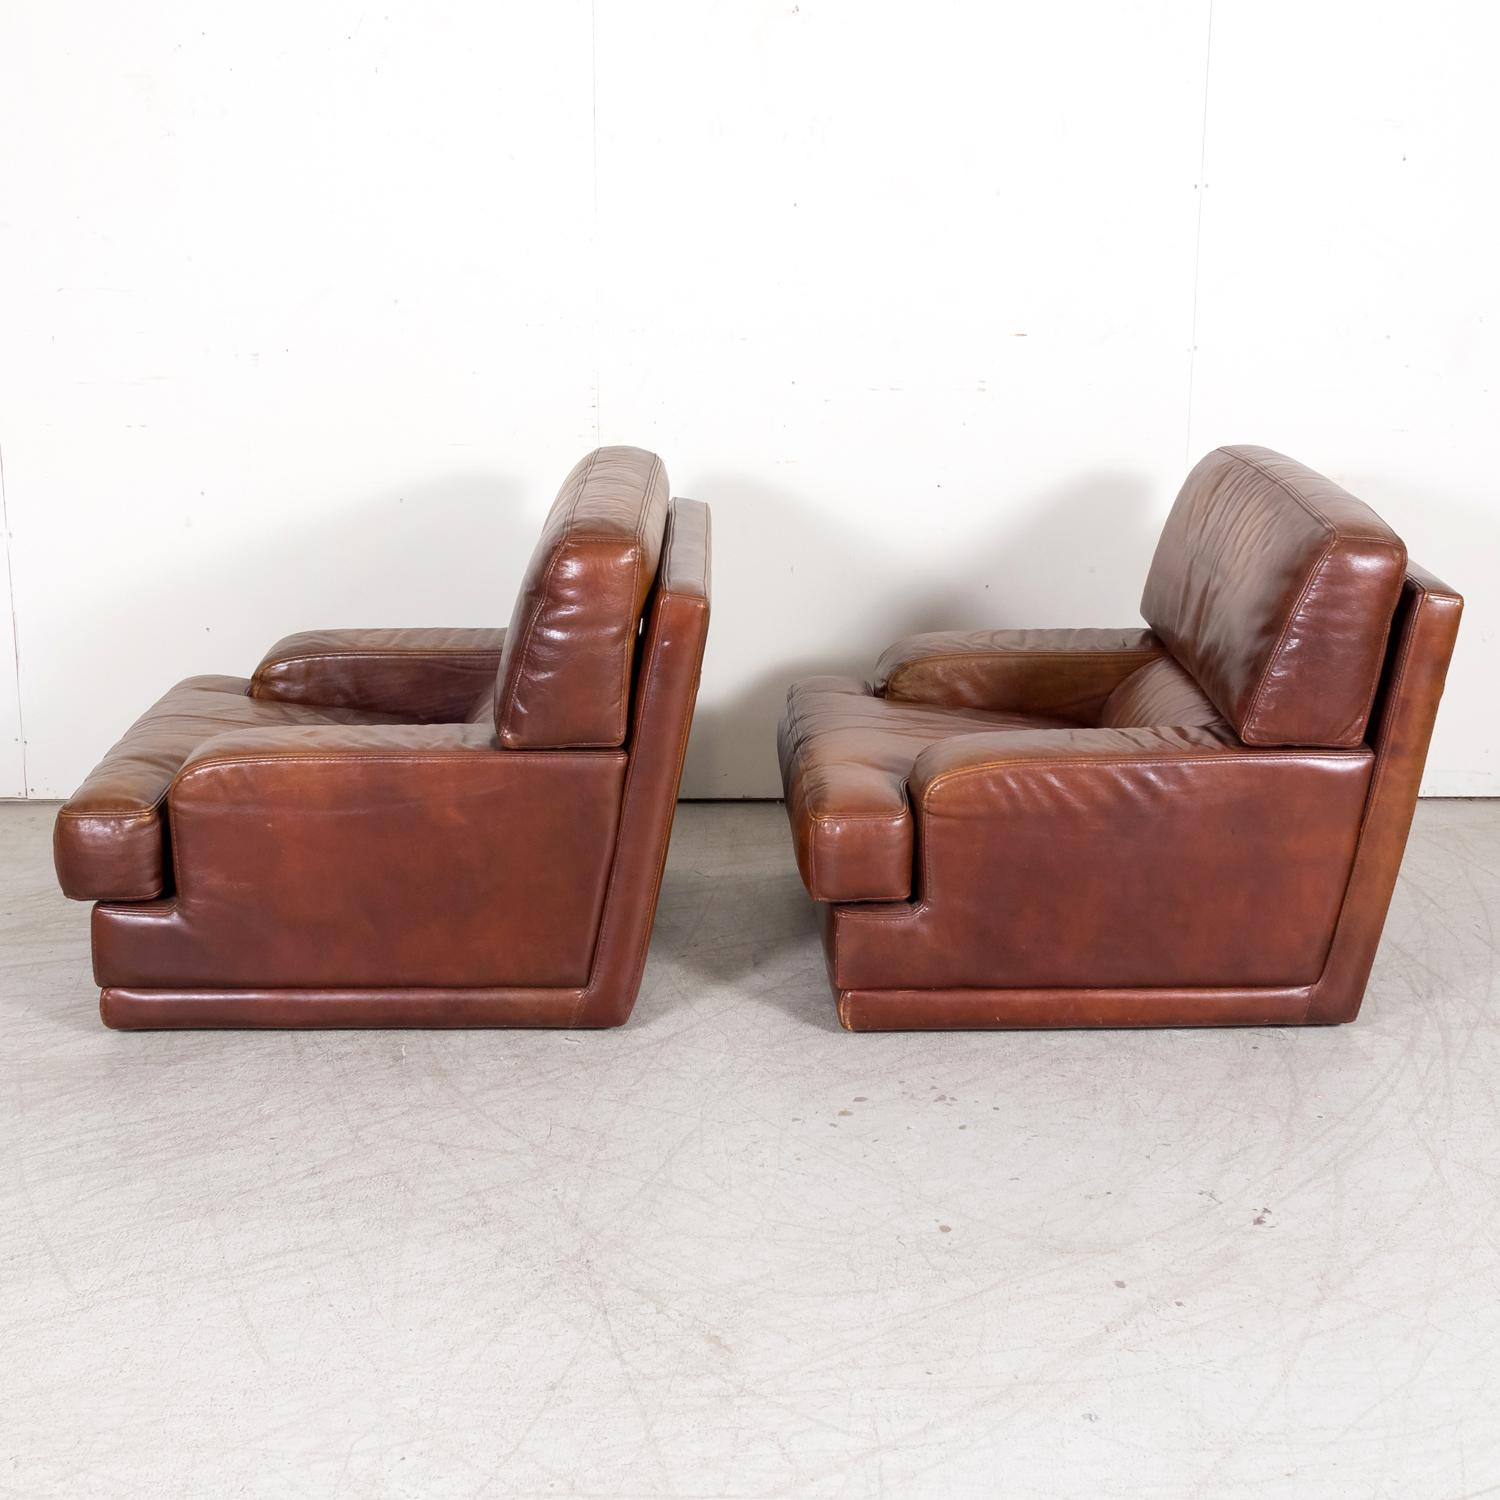 1970s Pair of French Mid-Century Modern Oversized Cognac Lounge Armchairs For Sale 1